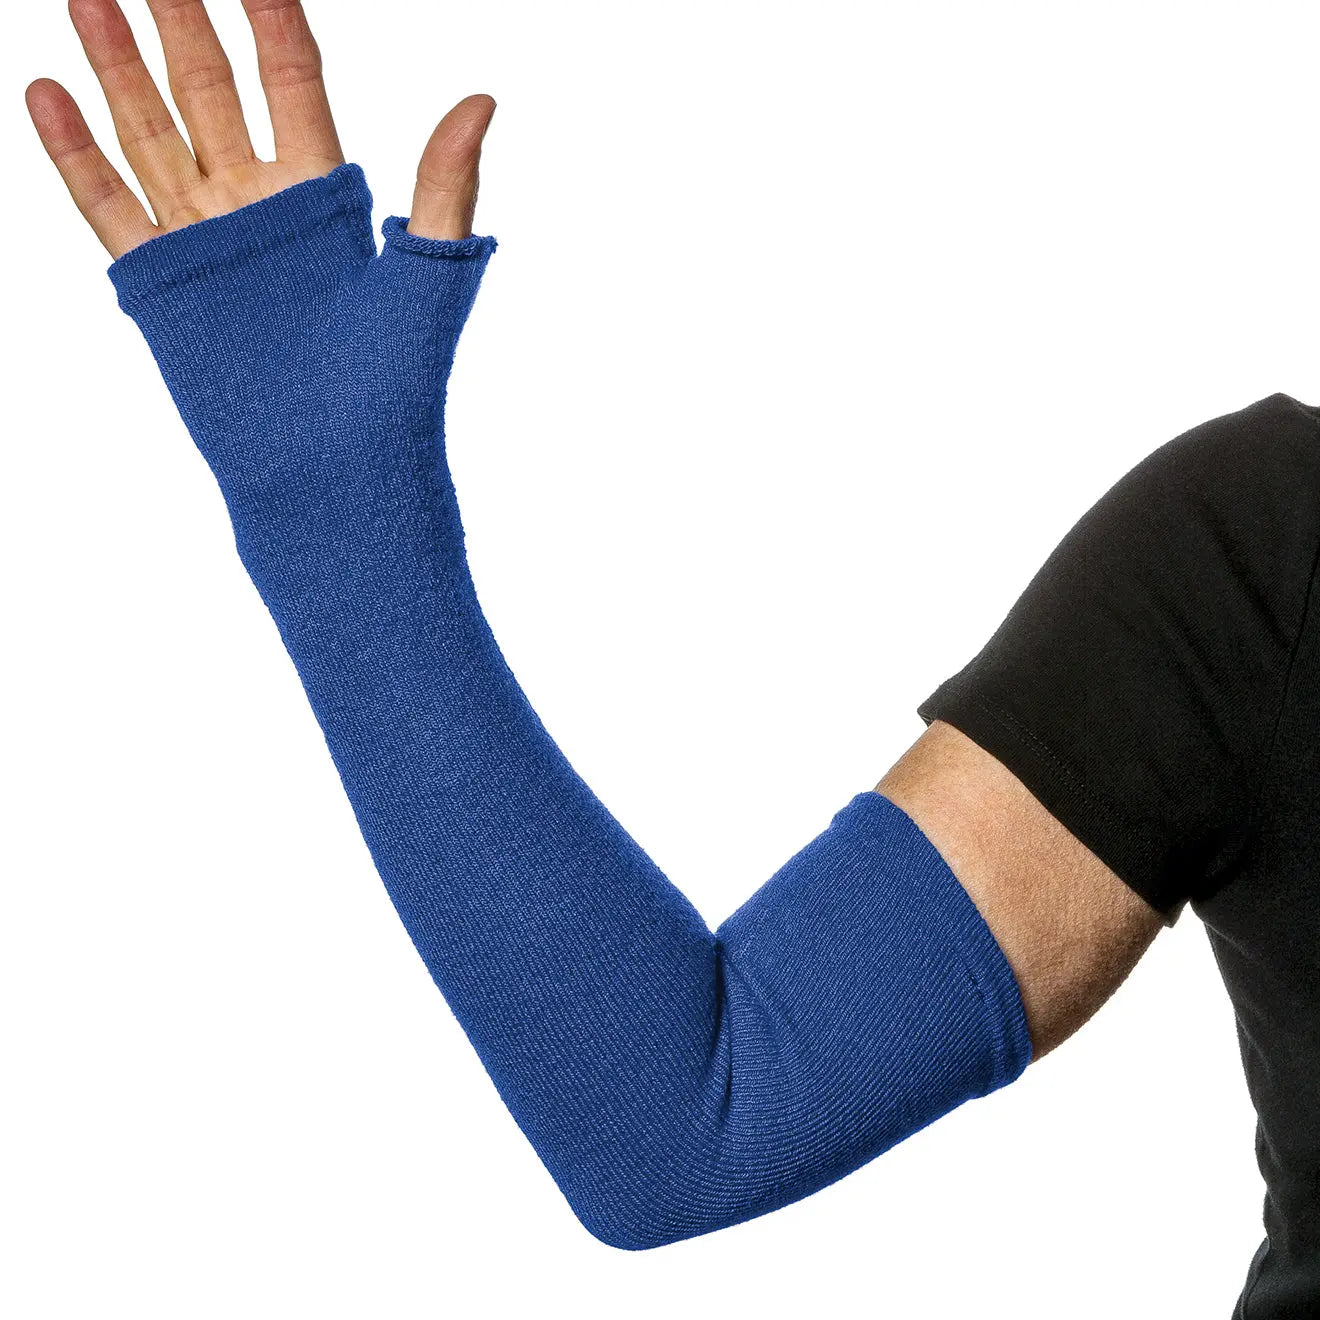  Limbkeepers Non-Compression Protective Sleeves - Forearm -  Light Weight (Black) : Health & Household